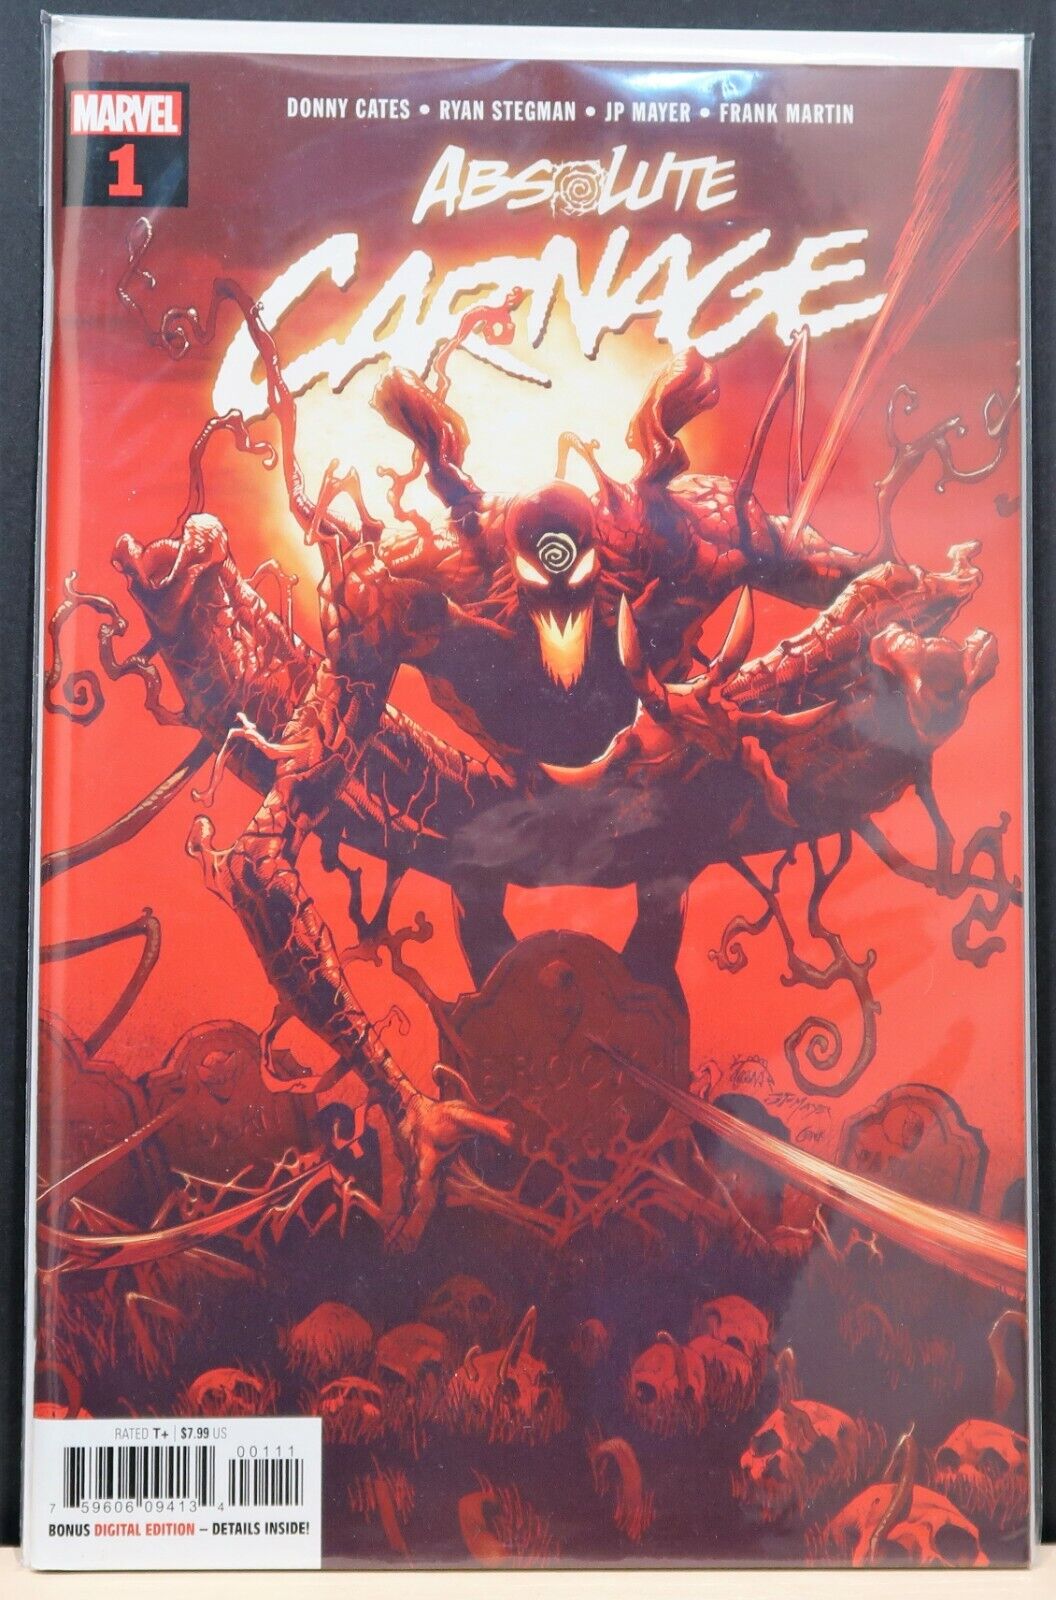 Absolute Carnage #1 (2019) - Donny Cates, Ryan Stegman Marvel Comics